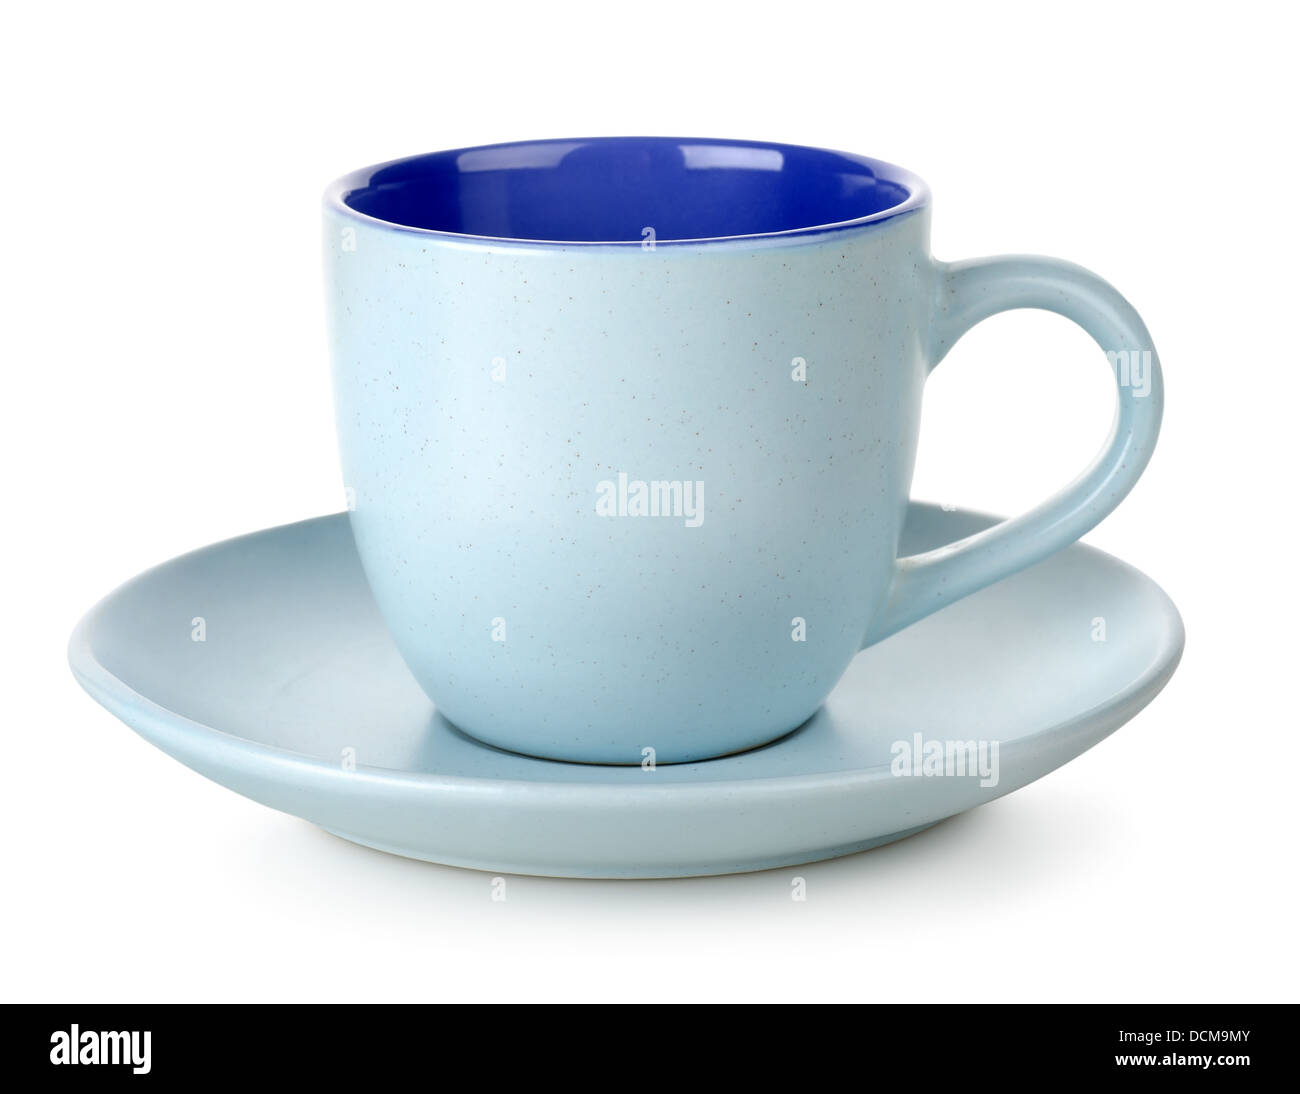 Blue cup and saucer Stock Photo - Alamy